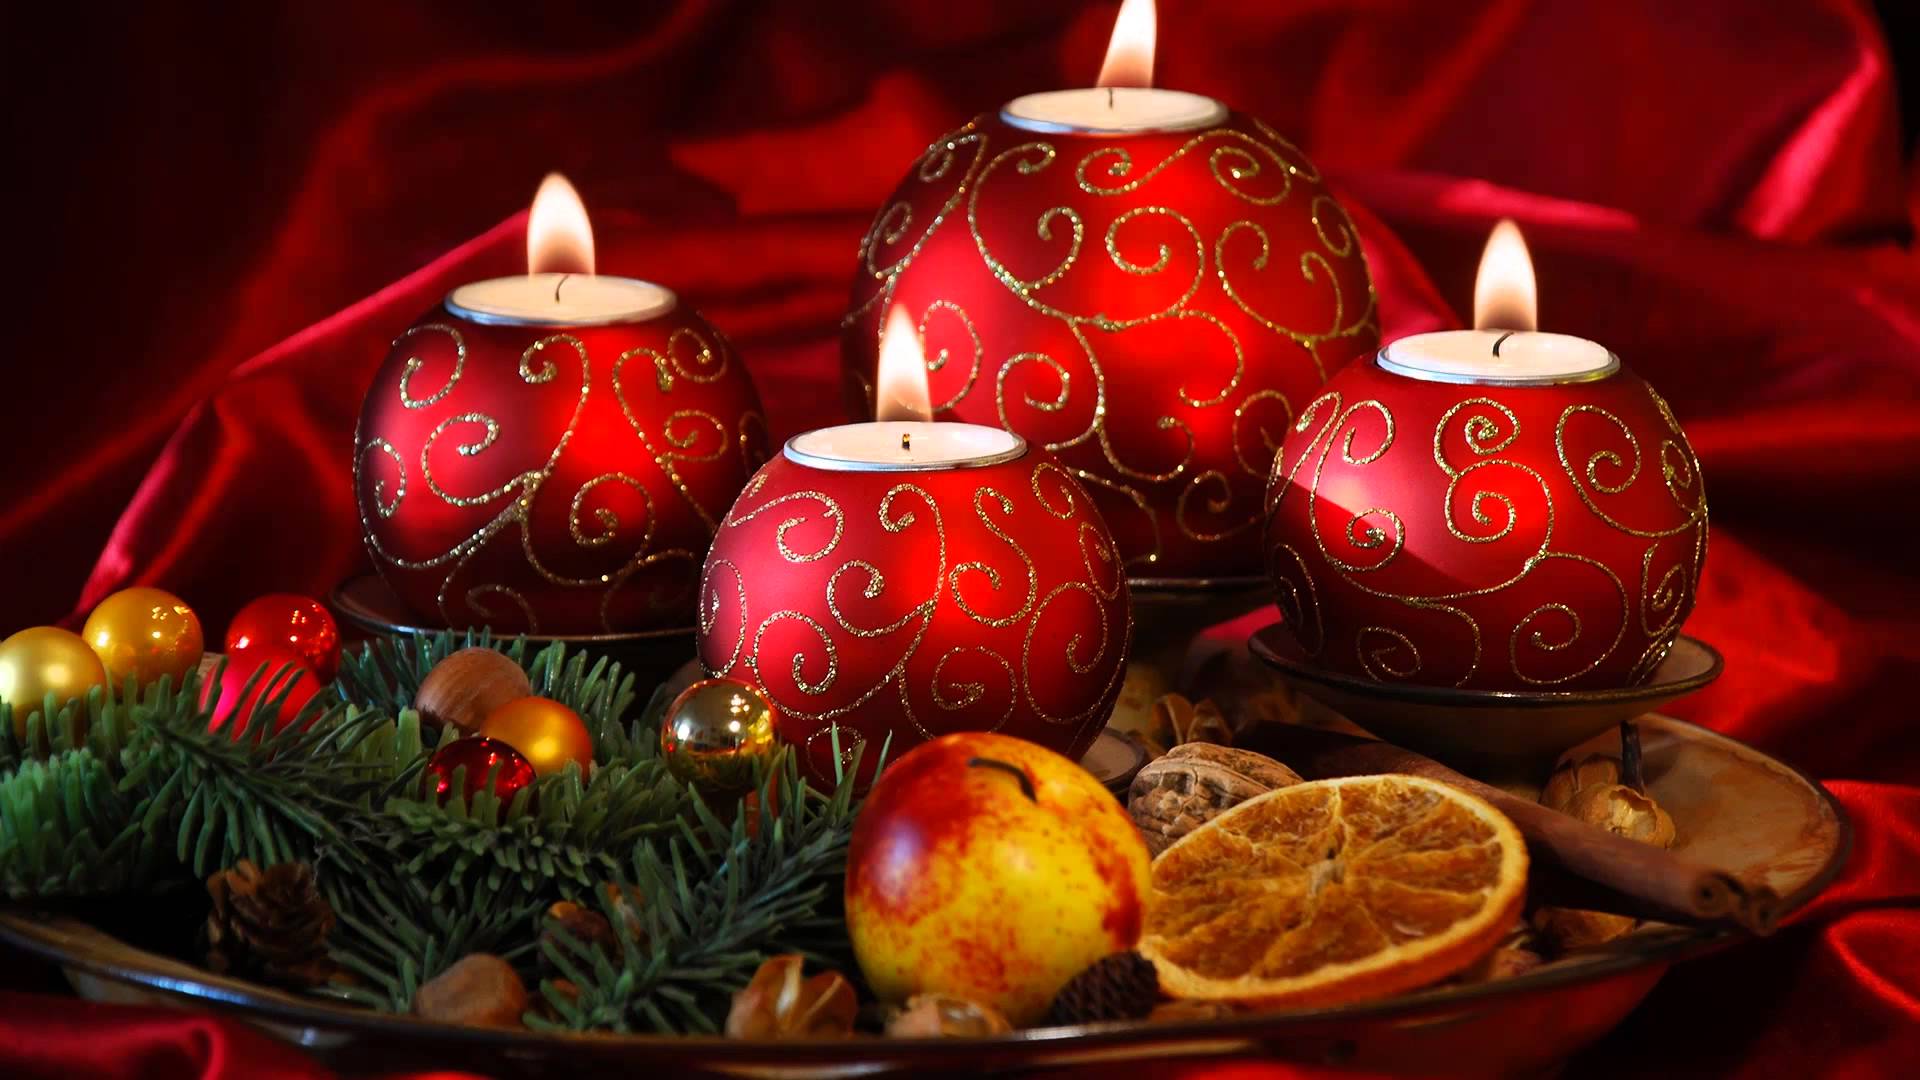 Christmas Candle - romantic and relaxing decorated candle flame ...